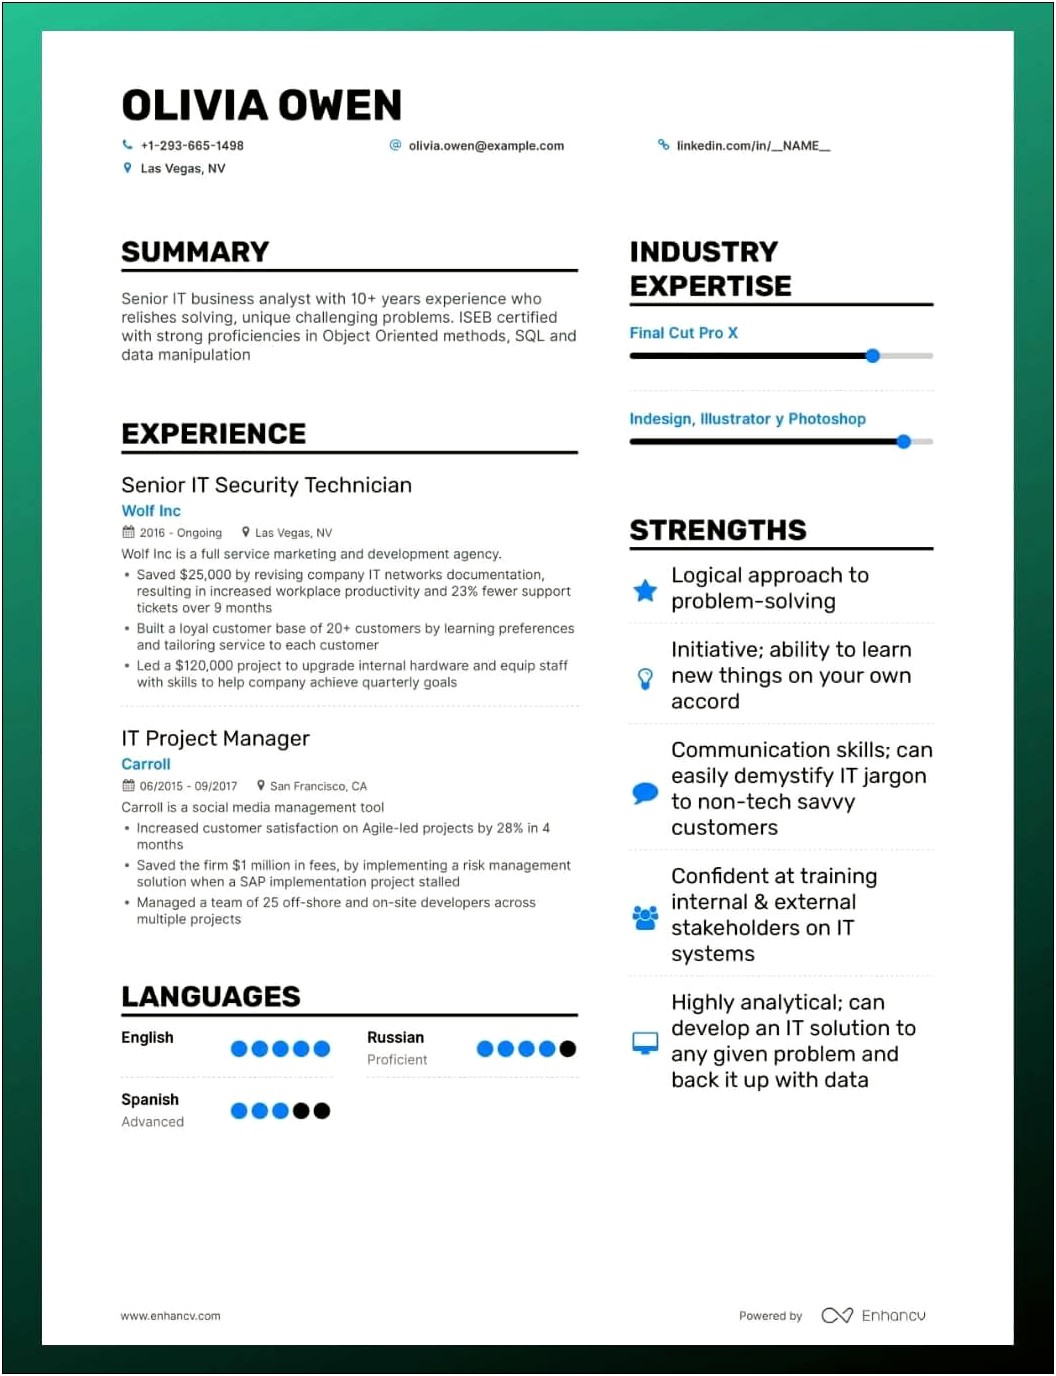 List Of Skills And Qualifications For Resume